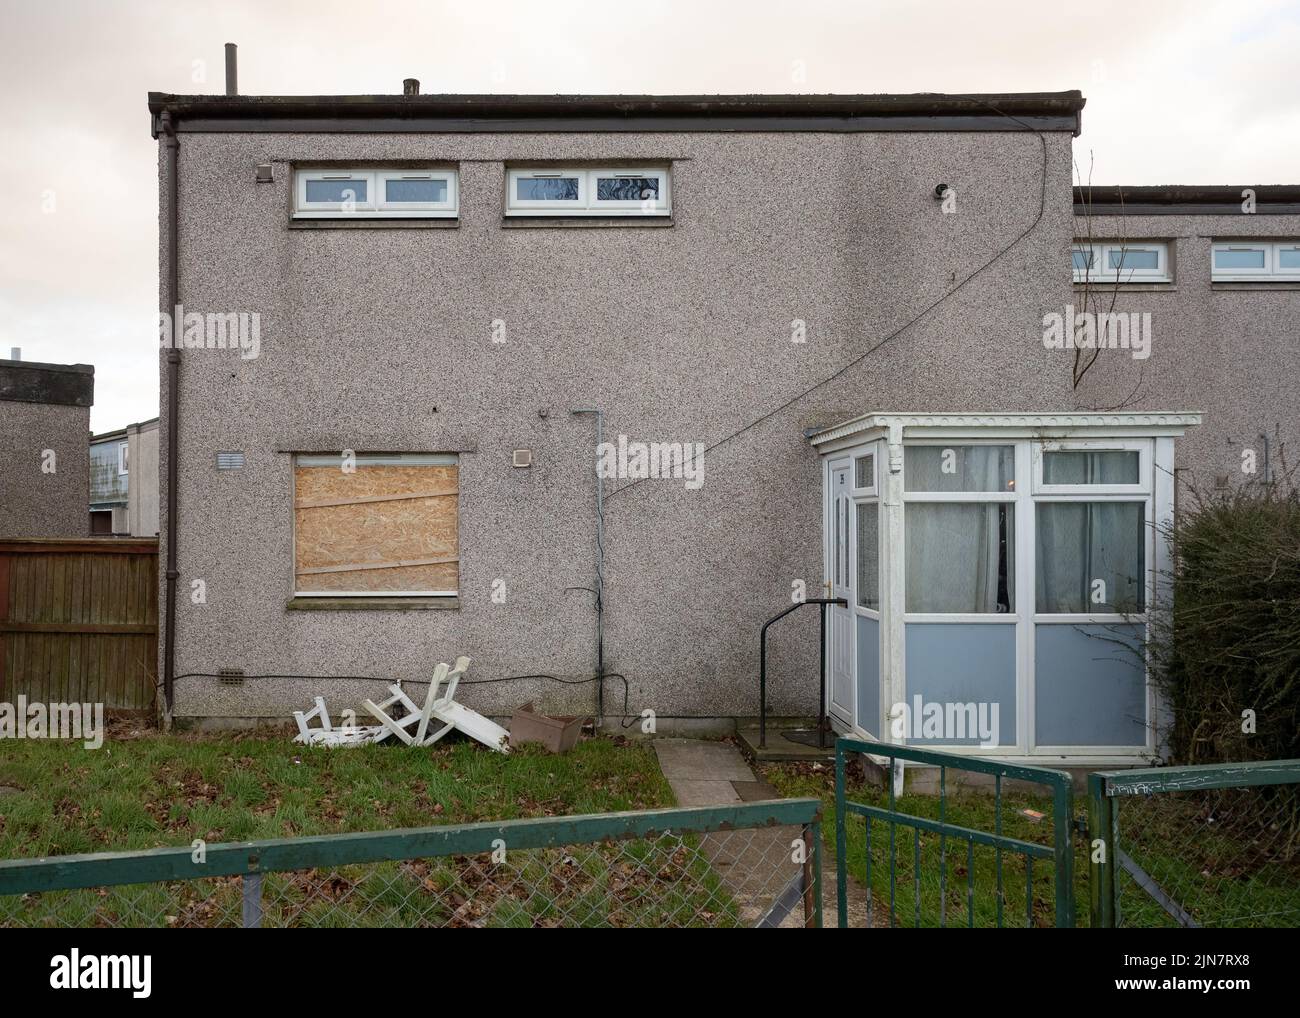 Boarded up council house in Glenrothes, Fife, Scotland, UK. Stock Photo